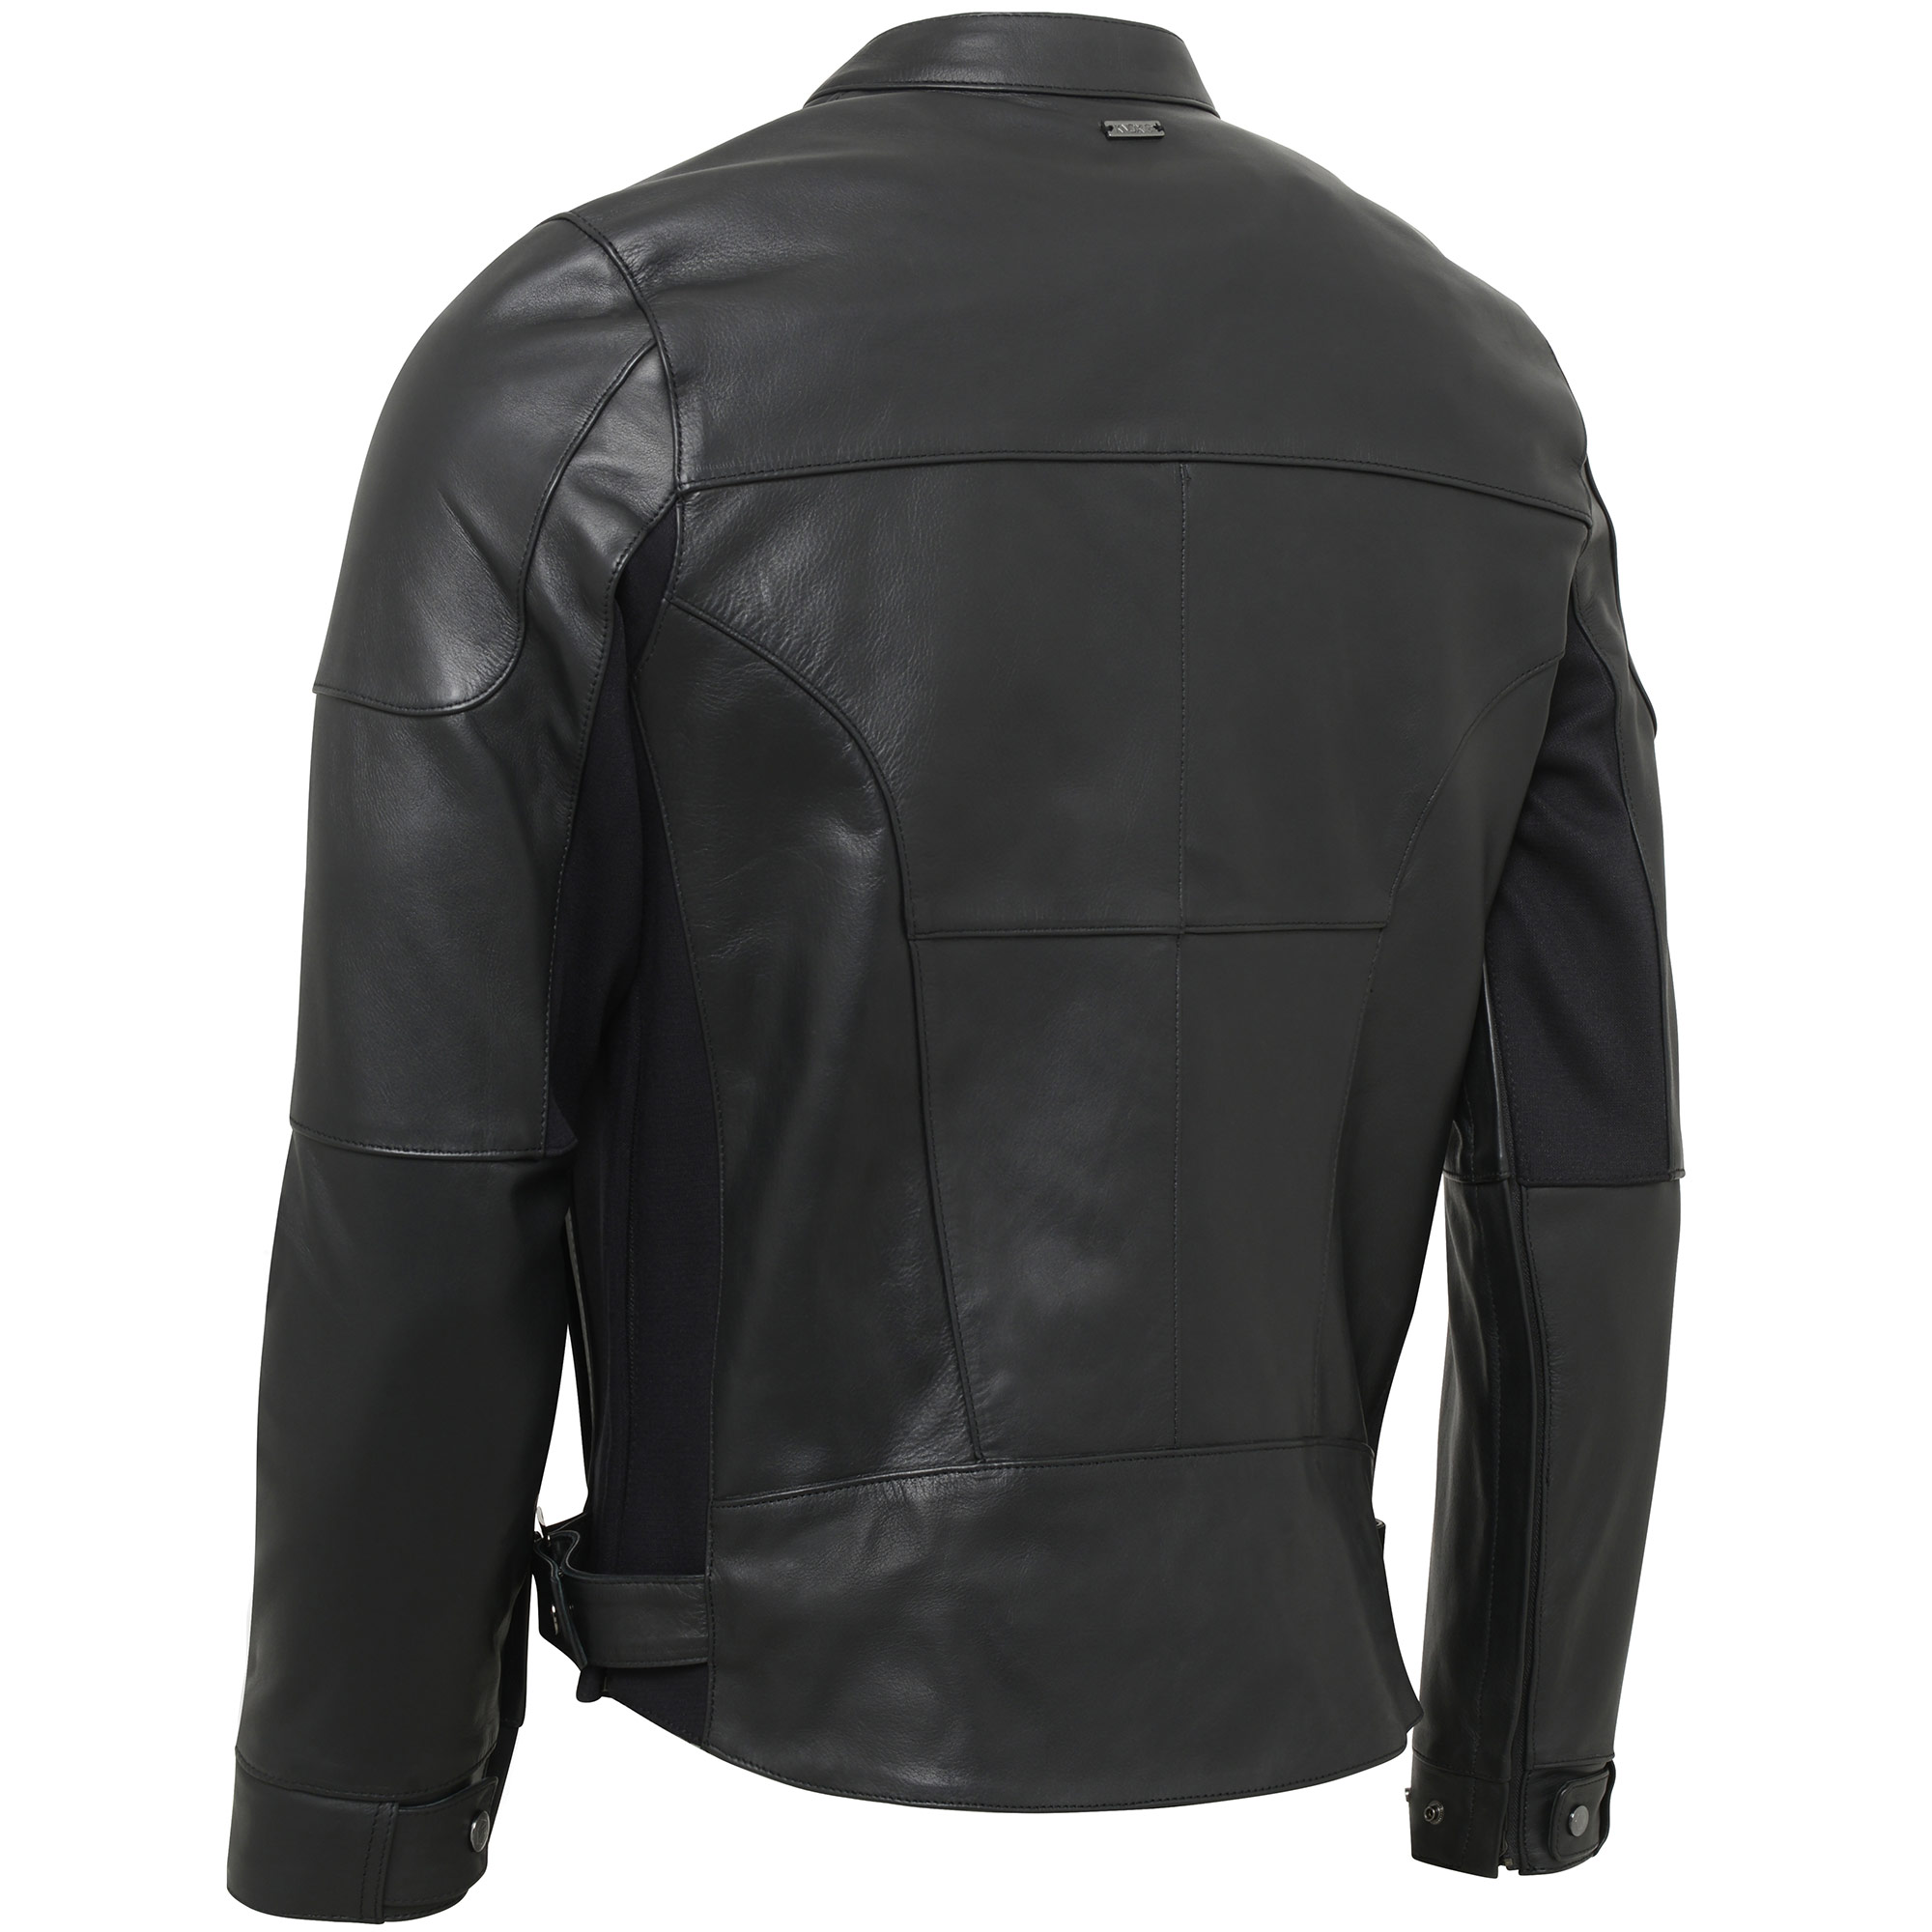 Knox Ford Leather Sports Motorcycle Bike Riding Jacket With Sheepskin ...